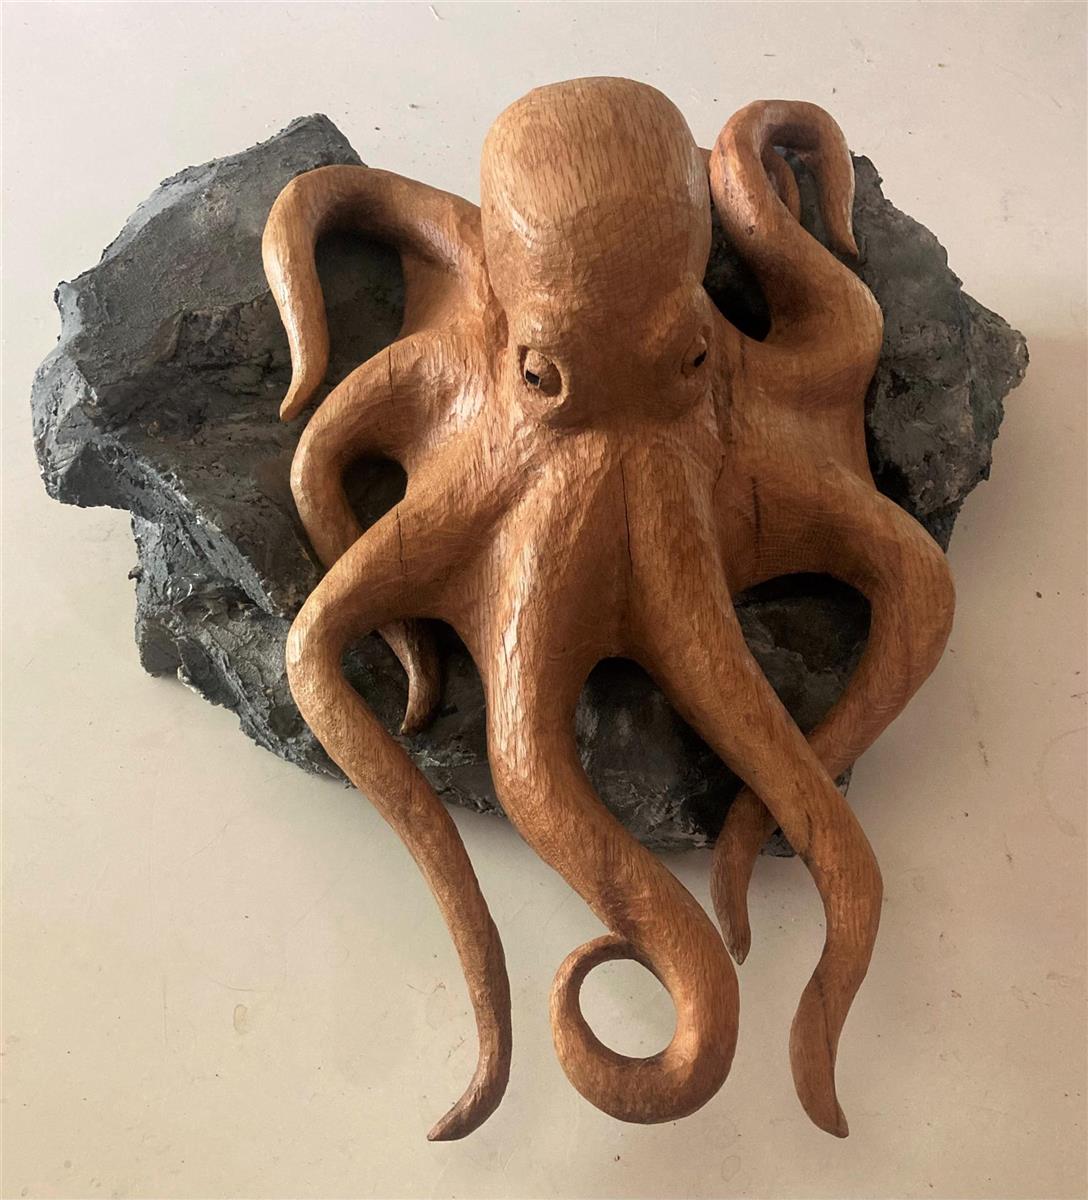 Oaktopus - 2nd All Other Media